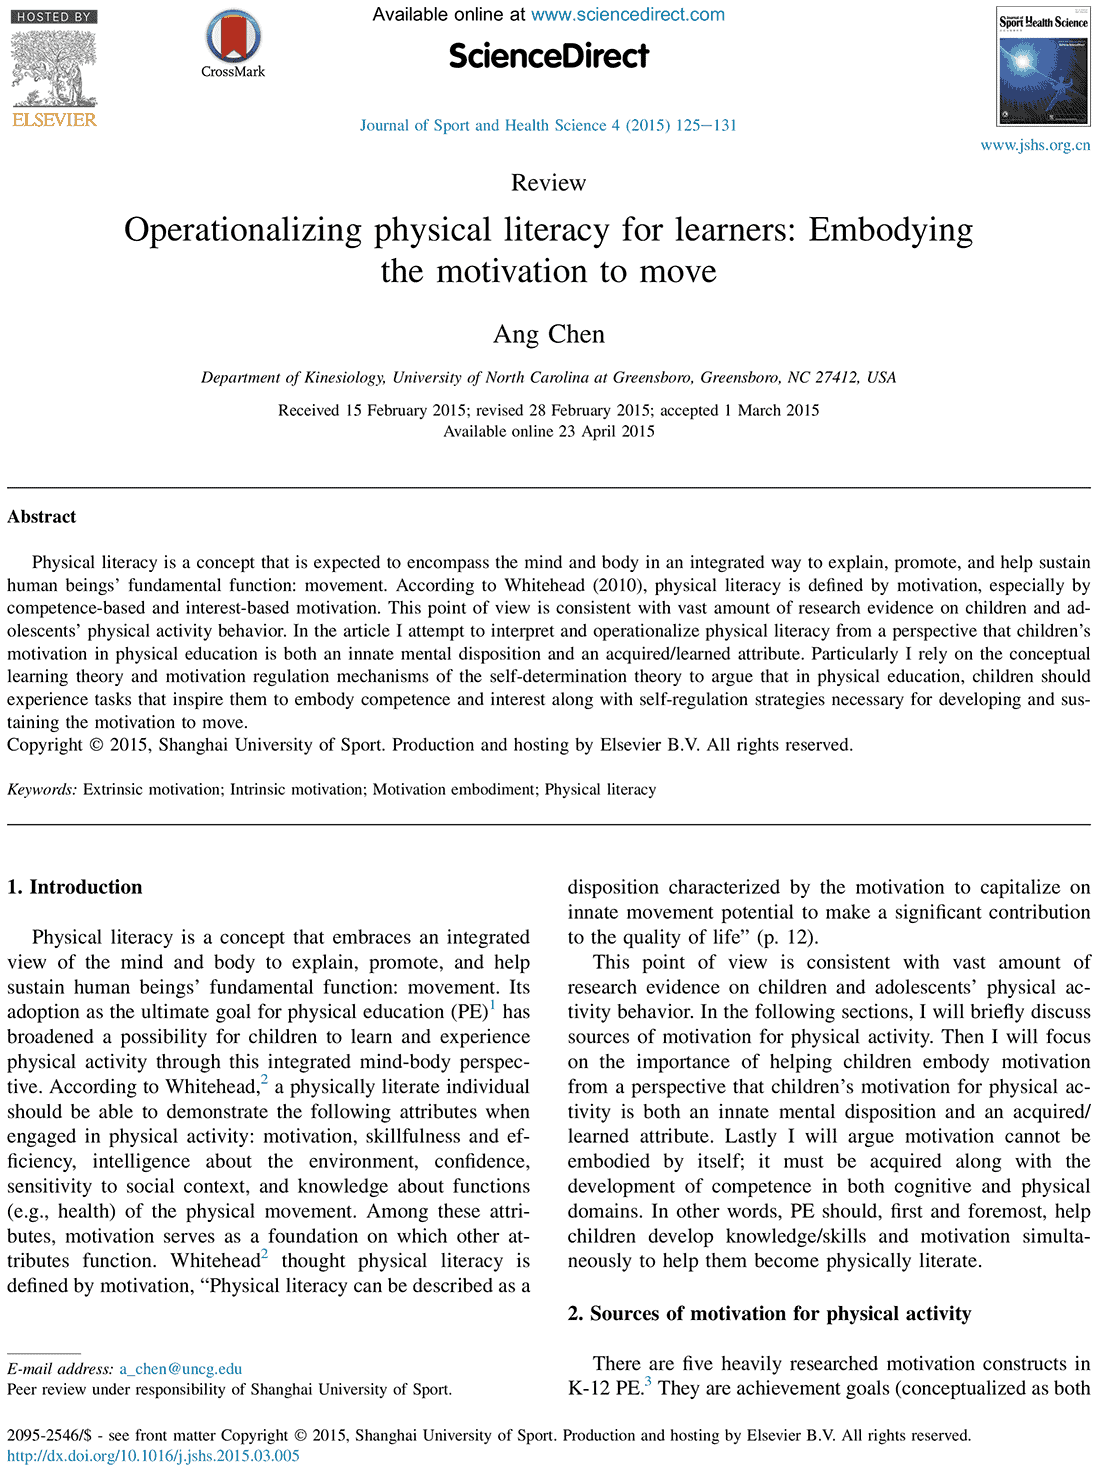 Operationalizing physical literacy for learners: Embodying the motivation to move